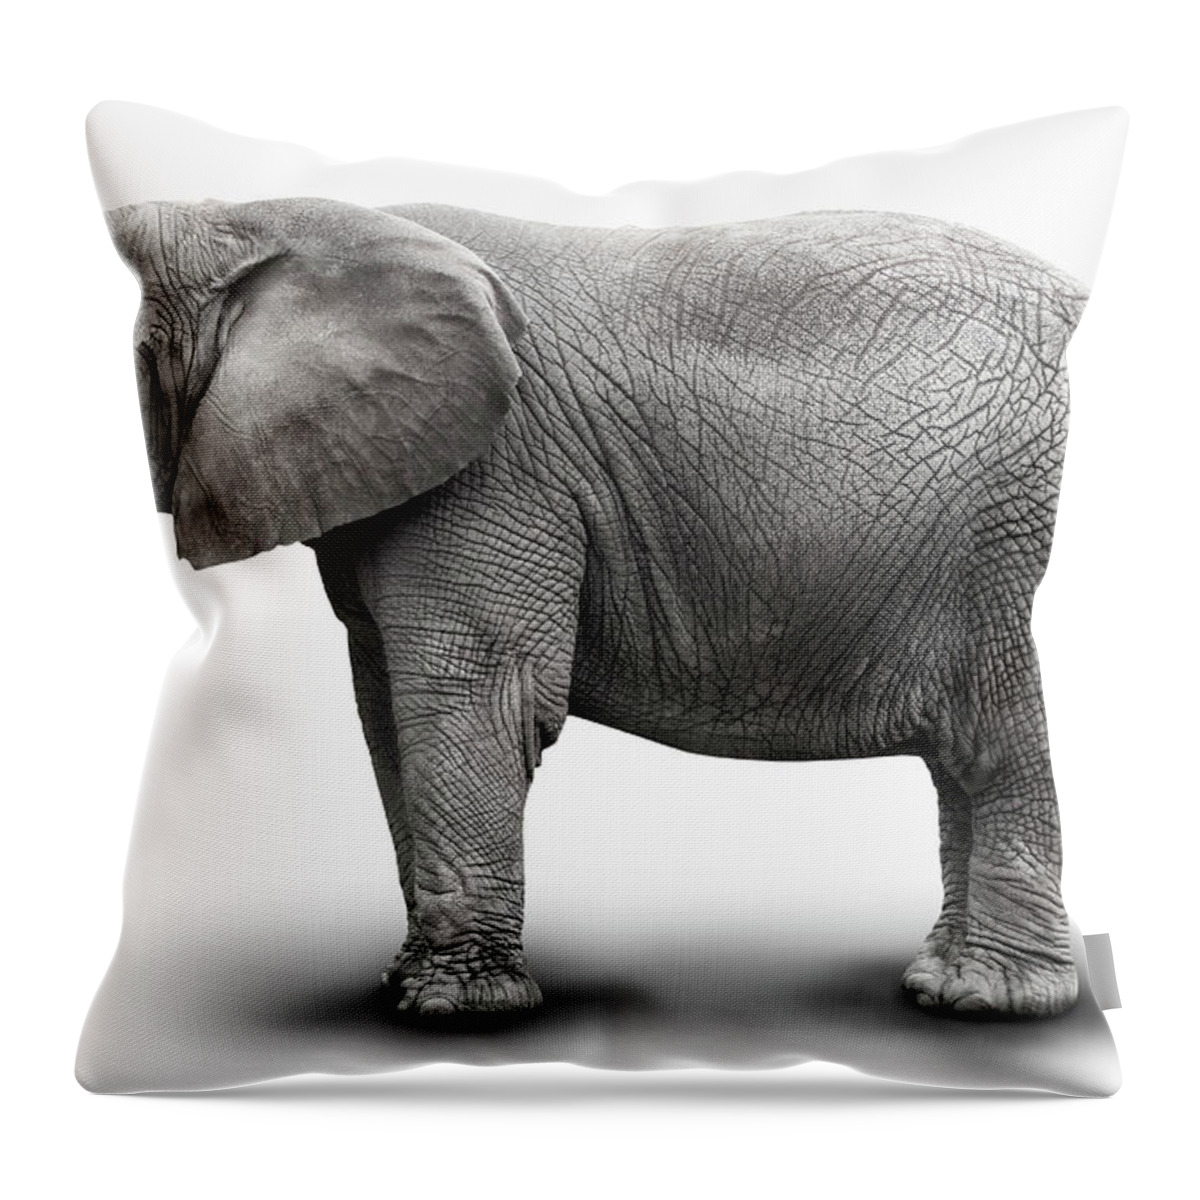 Toughness Throw Pillow featuring the photograph Elephant by Burazin